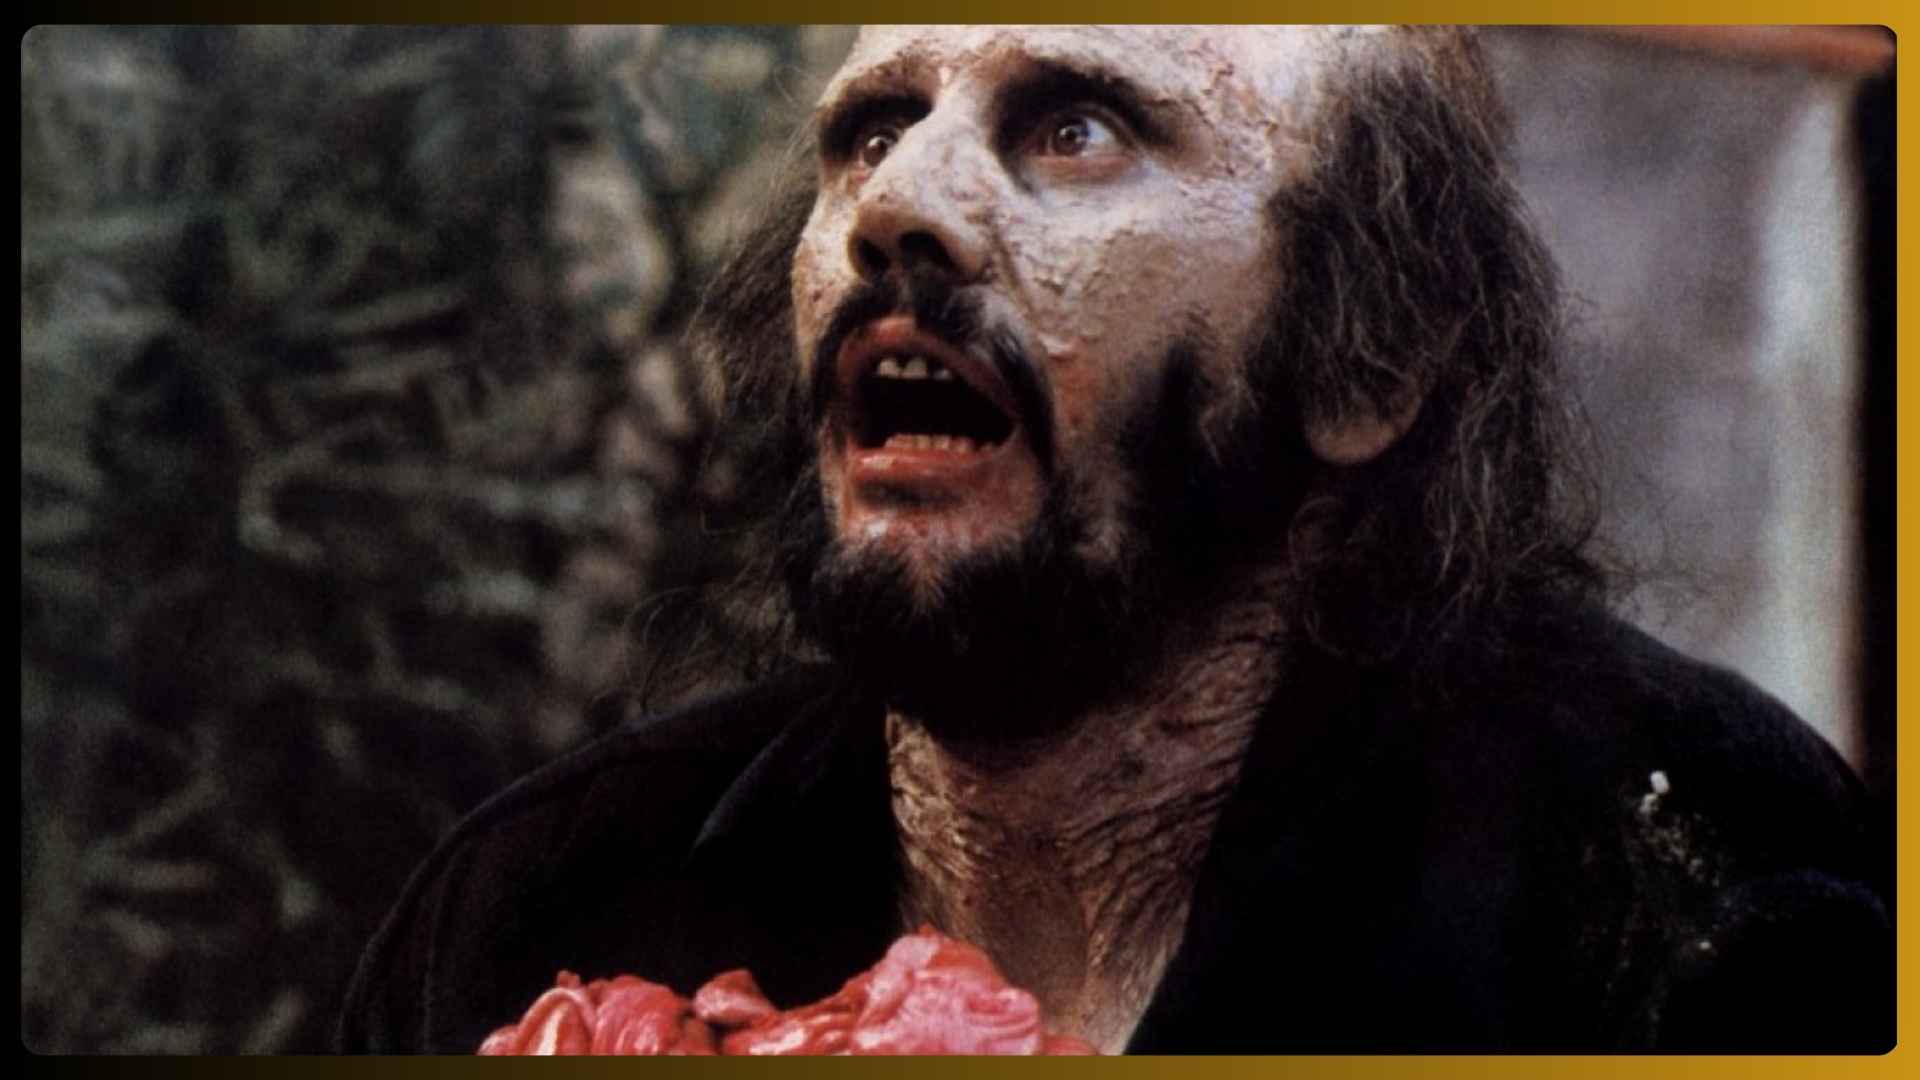 Top 10 Video Nasties That Gave Britain the Chills